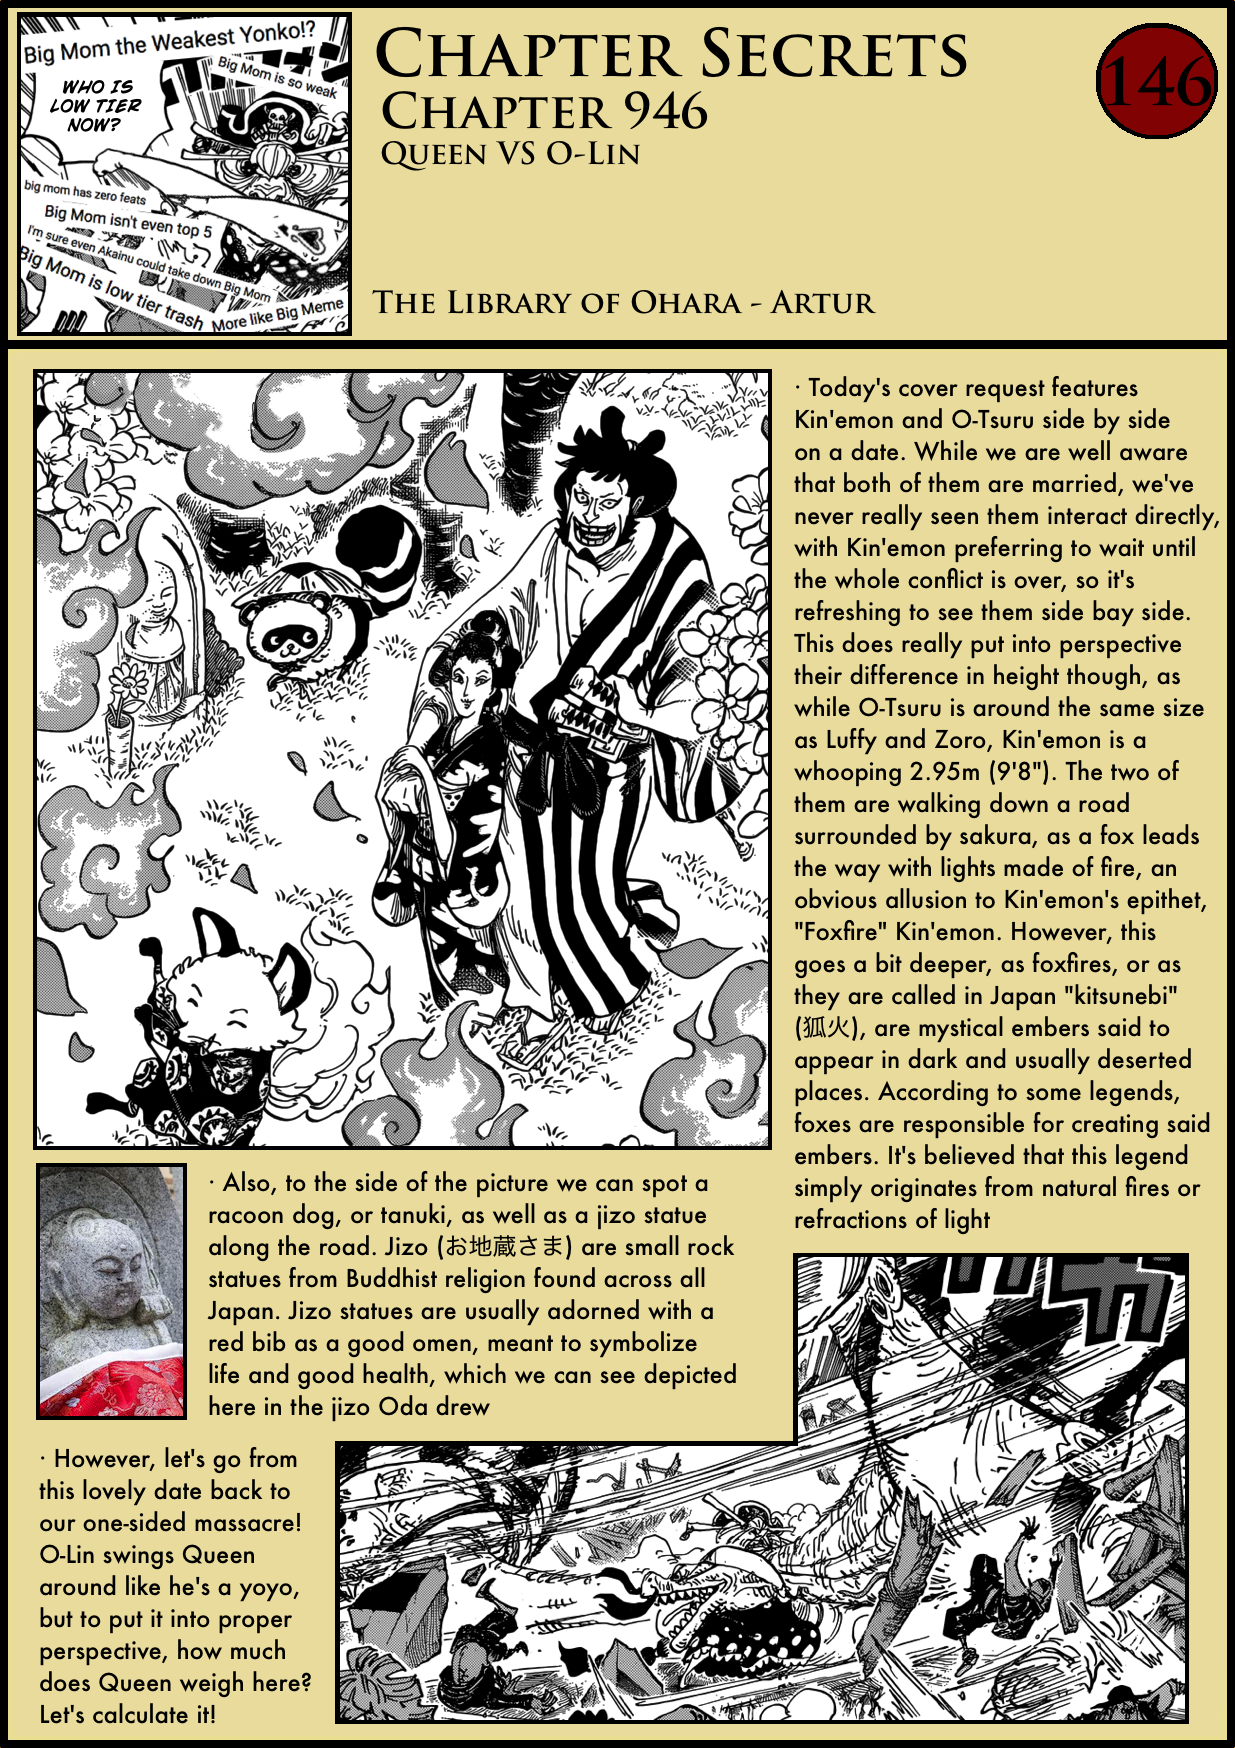 Read One Piece Chapter 854 : What Are You Doing!?? on Mangakakalot